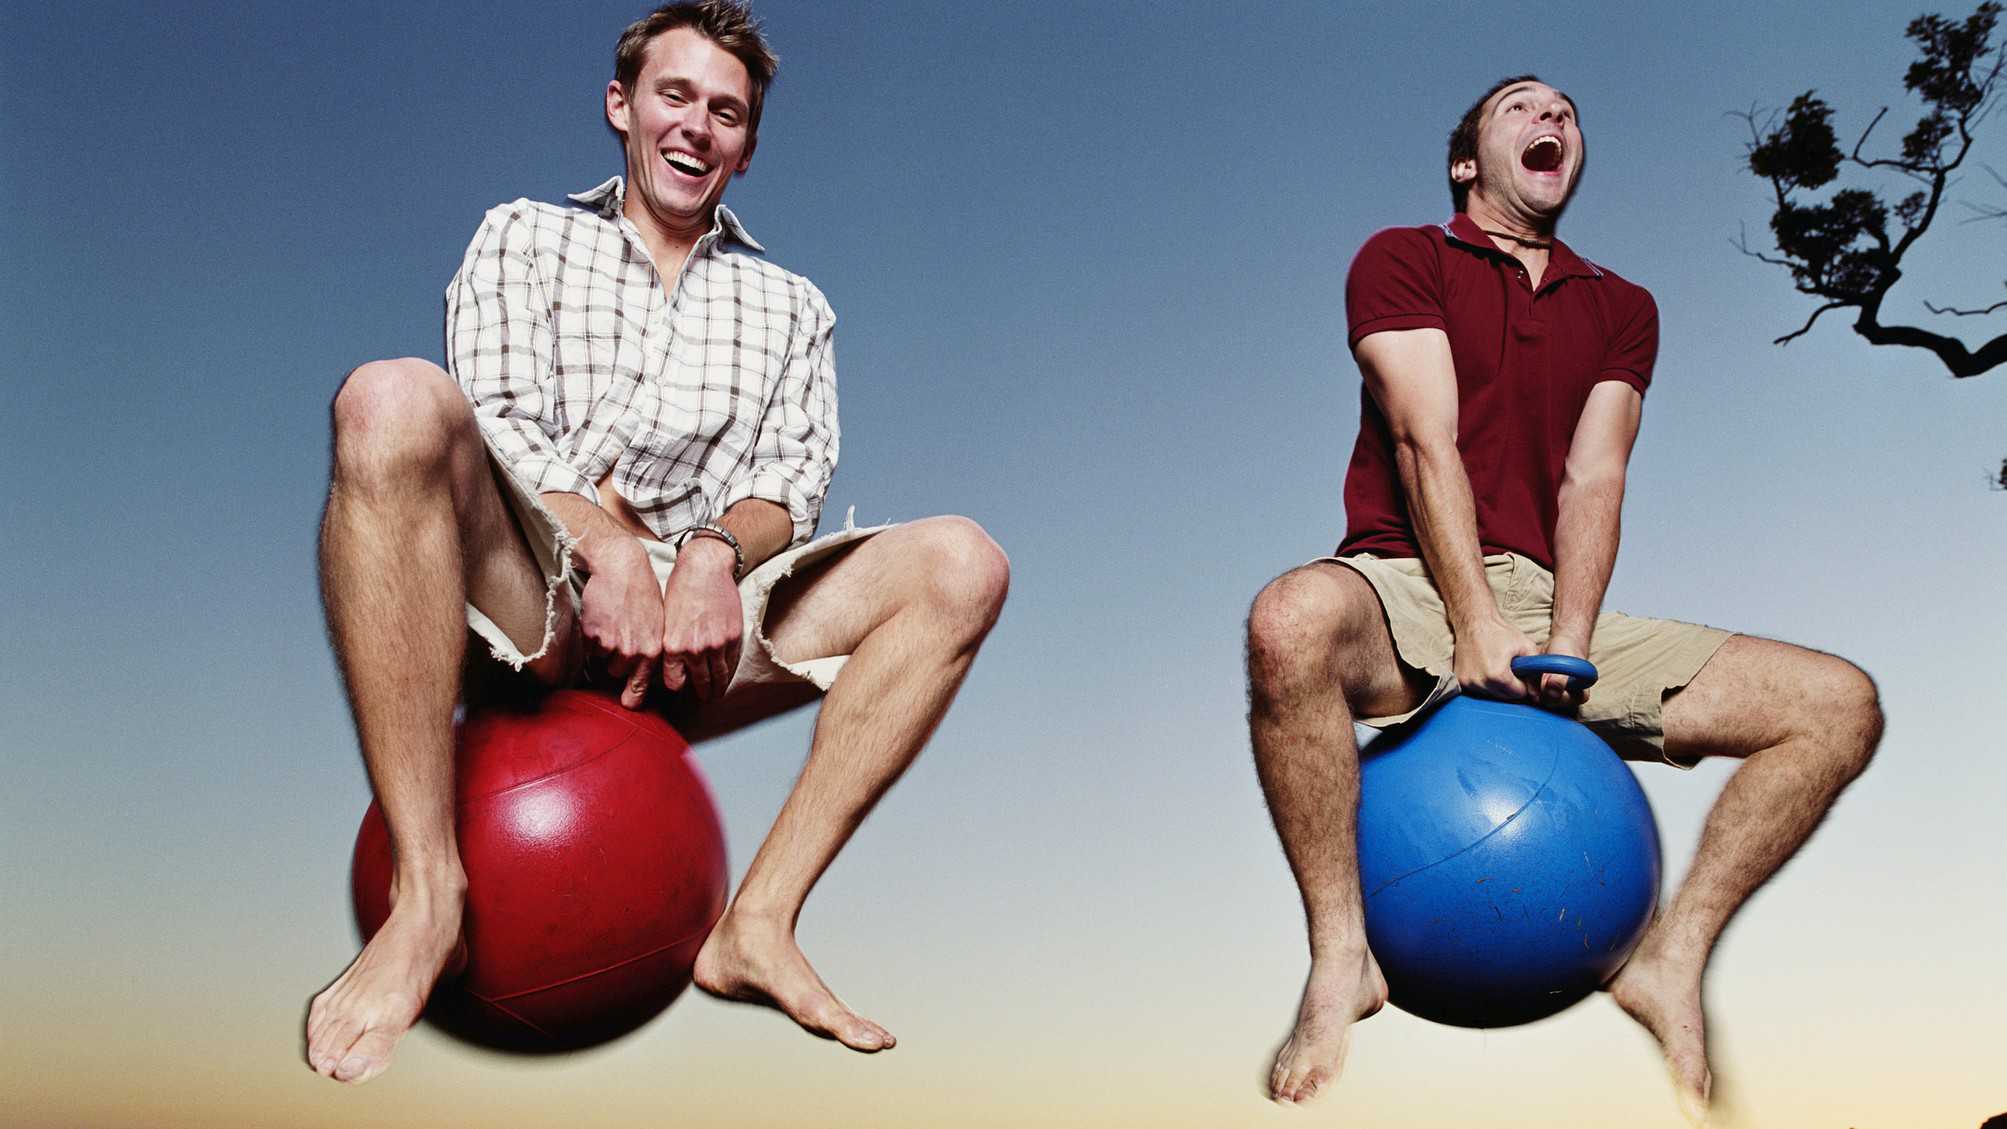 Two men laughing while bouncing on bouncy balls